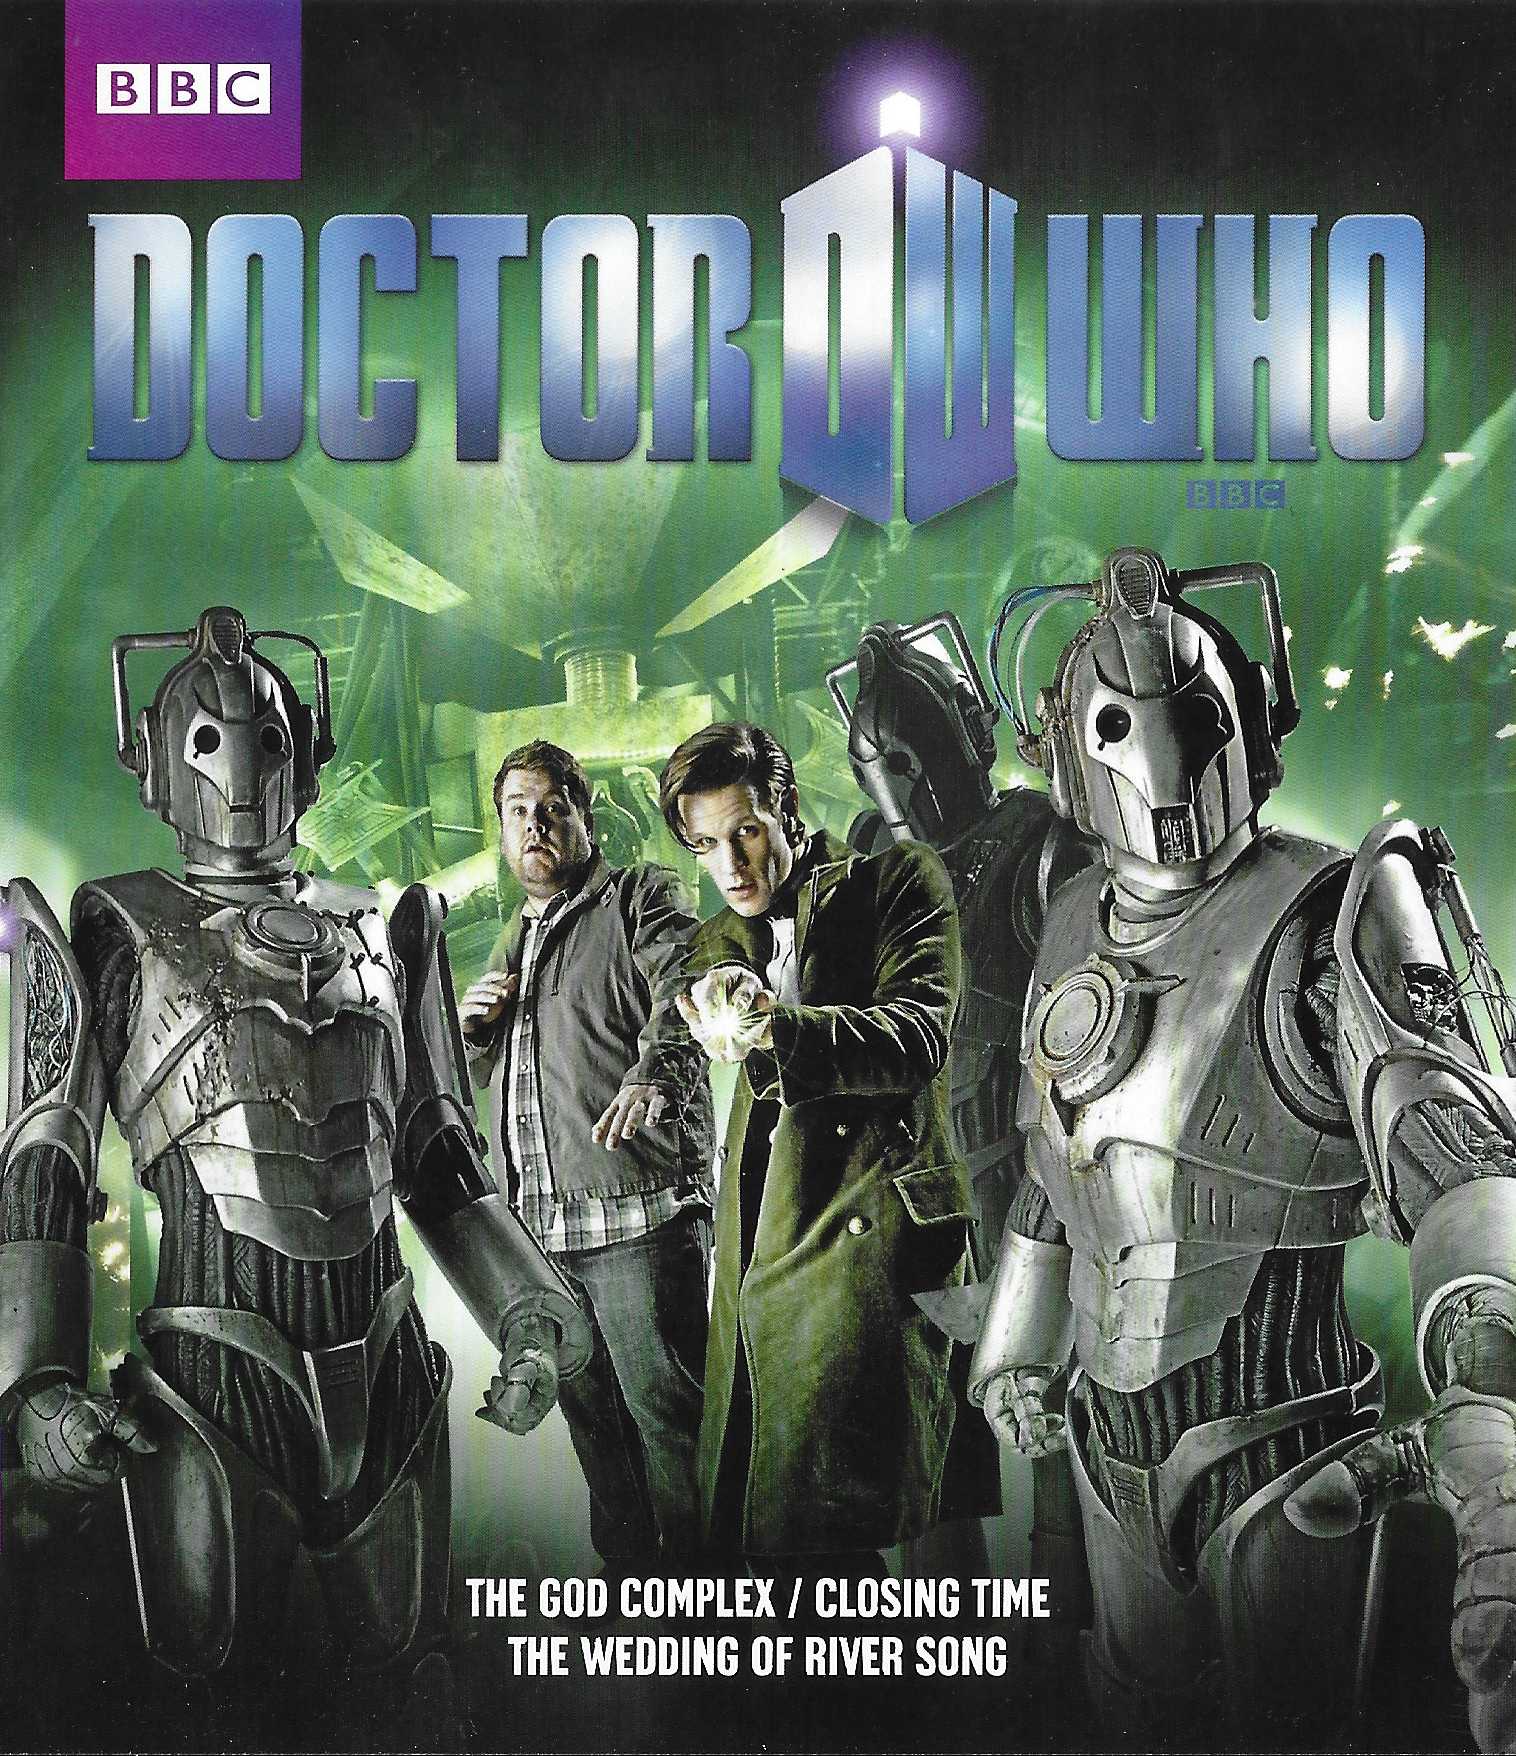 Picture of Doctor Who - Series 6, part 2b by artist Toby Whithouse / Gareth Roberts / Steven Moffat from the BBC blu-rays - Records and Tapes library